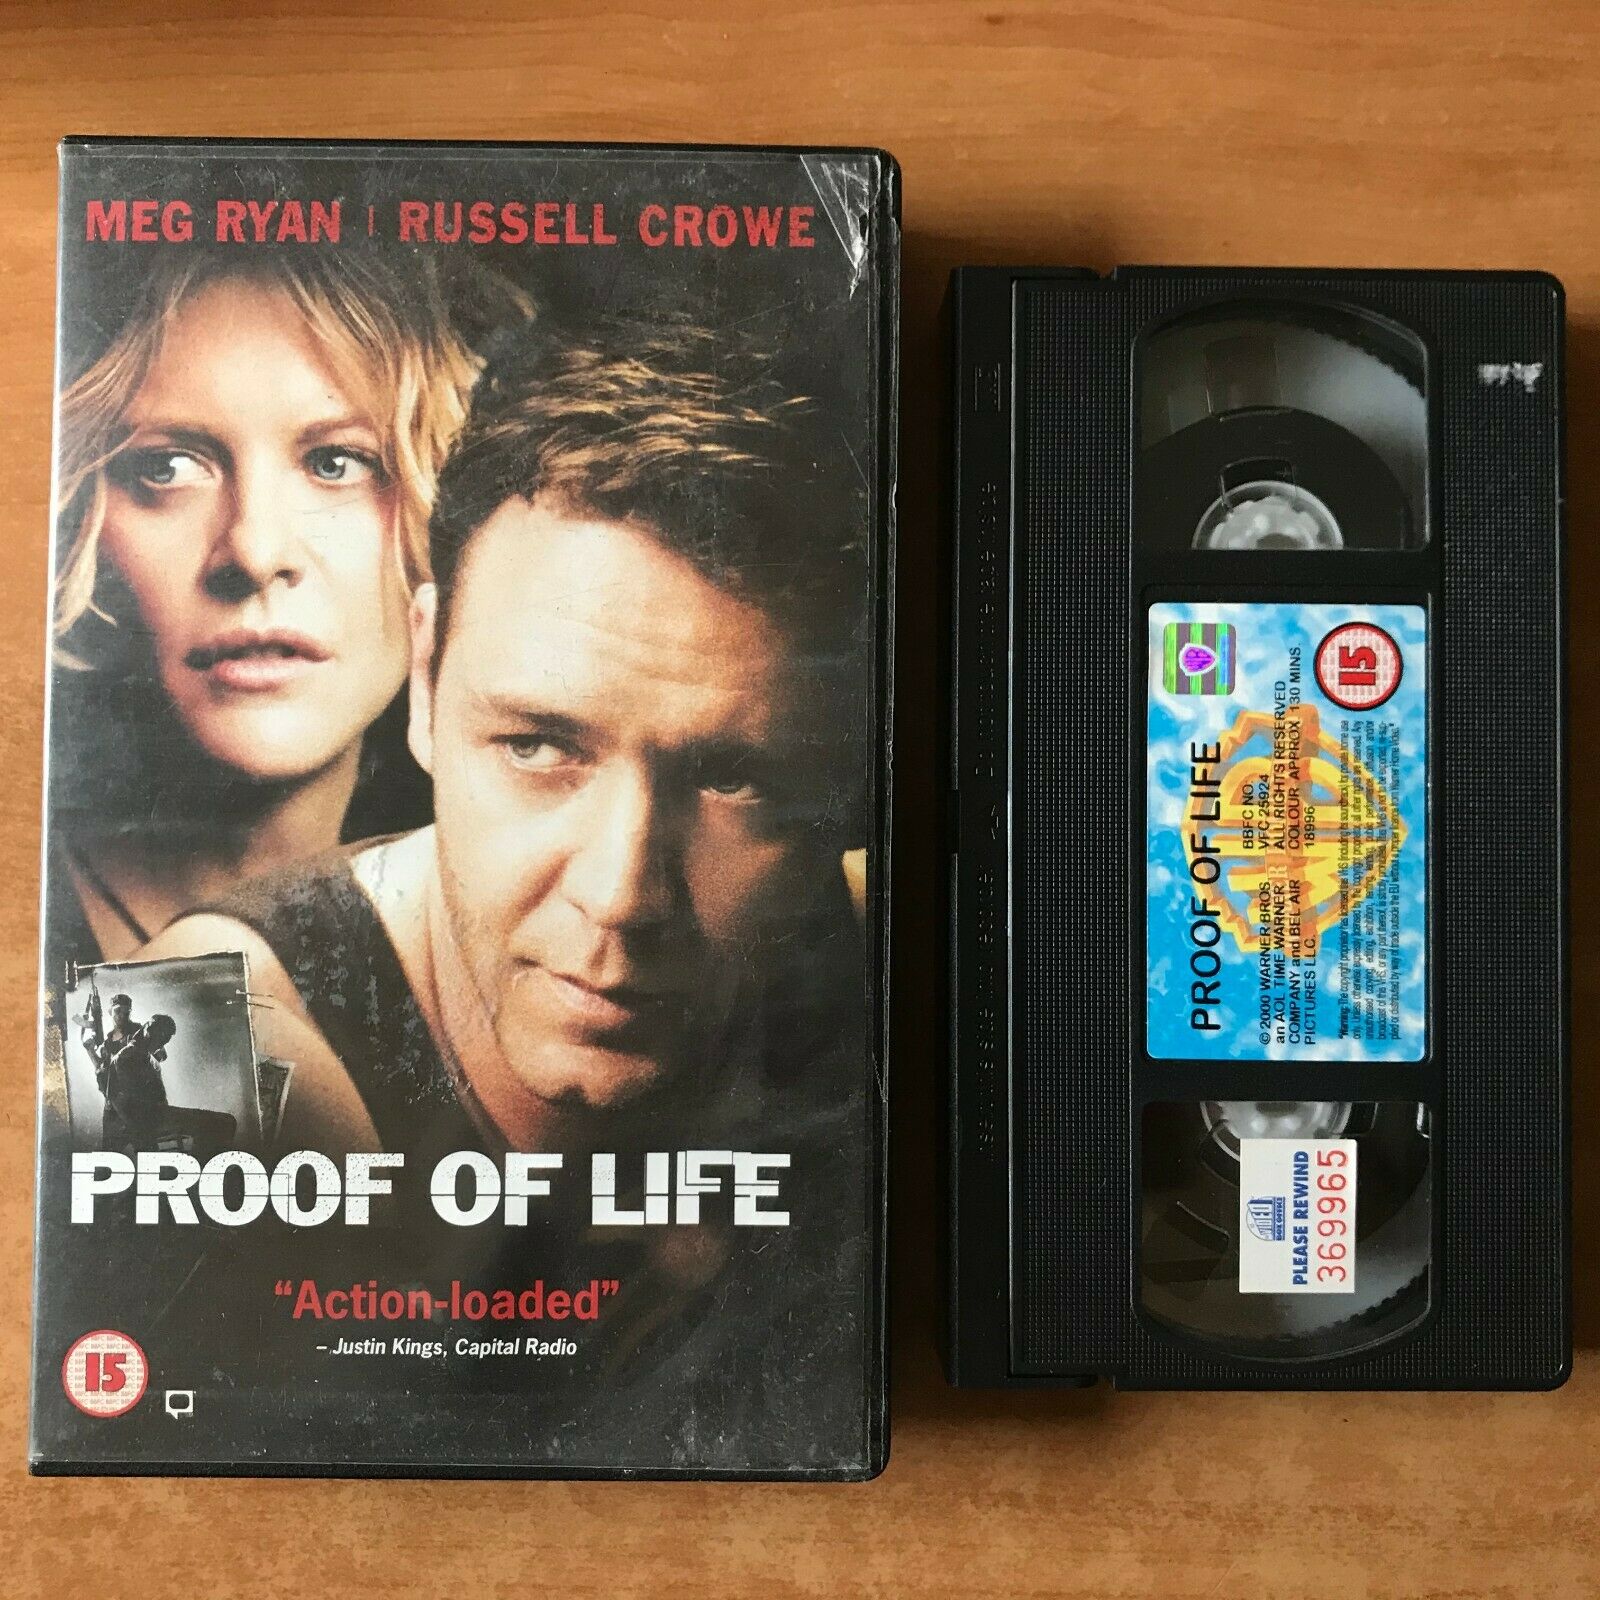 Proof Of Life: Action Thriller - Drama [Big Box] Meg Ryan / Russell Crowe - VHS-